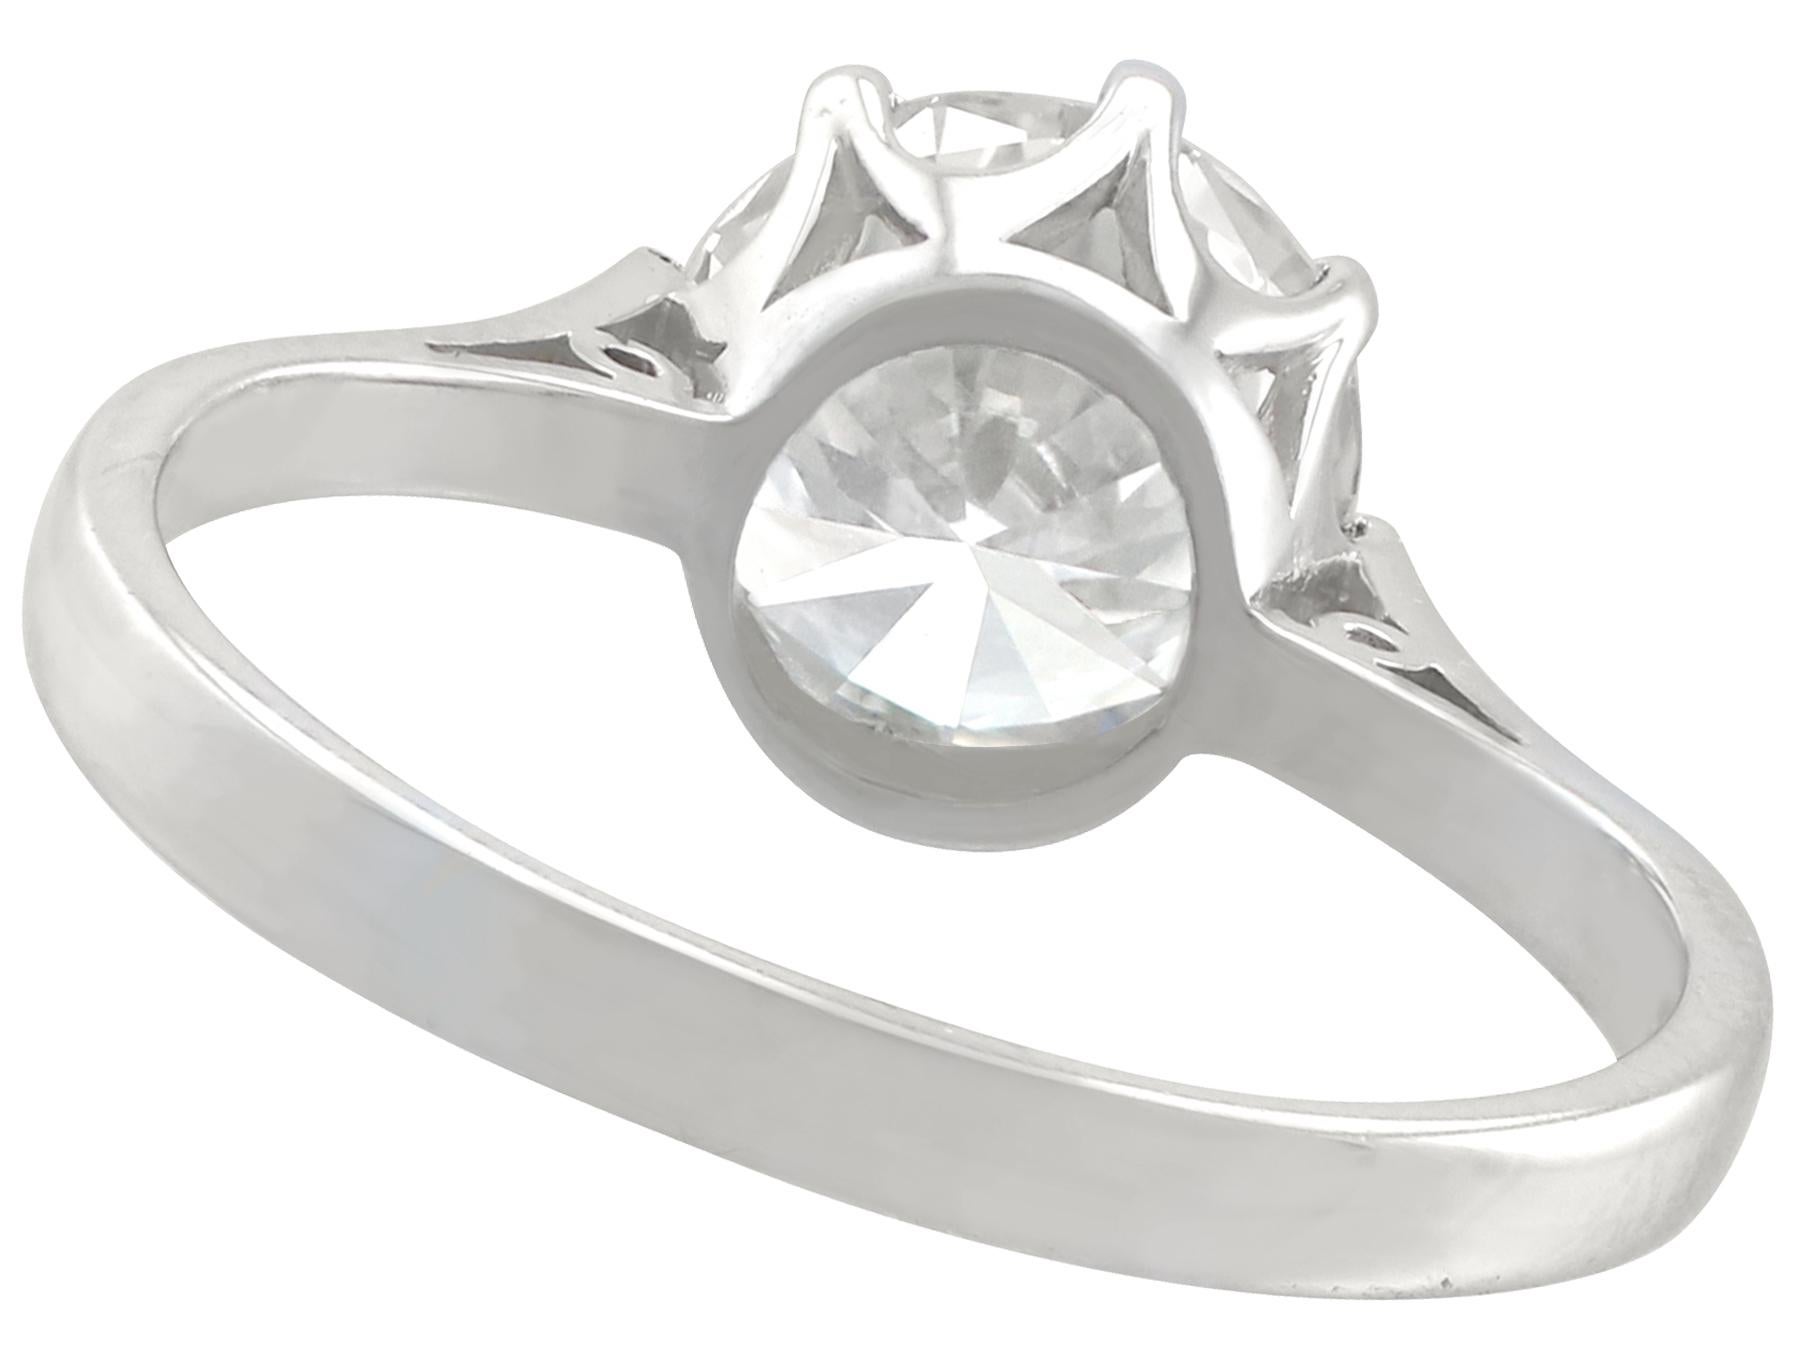 1.95 Carat Diamond and Platinum Solitaire Ring In Excellent Condition For Sale In Jesmond, Newcastle Upon Tyne